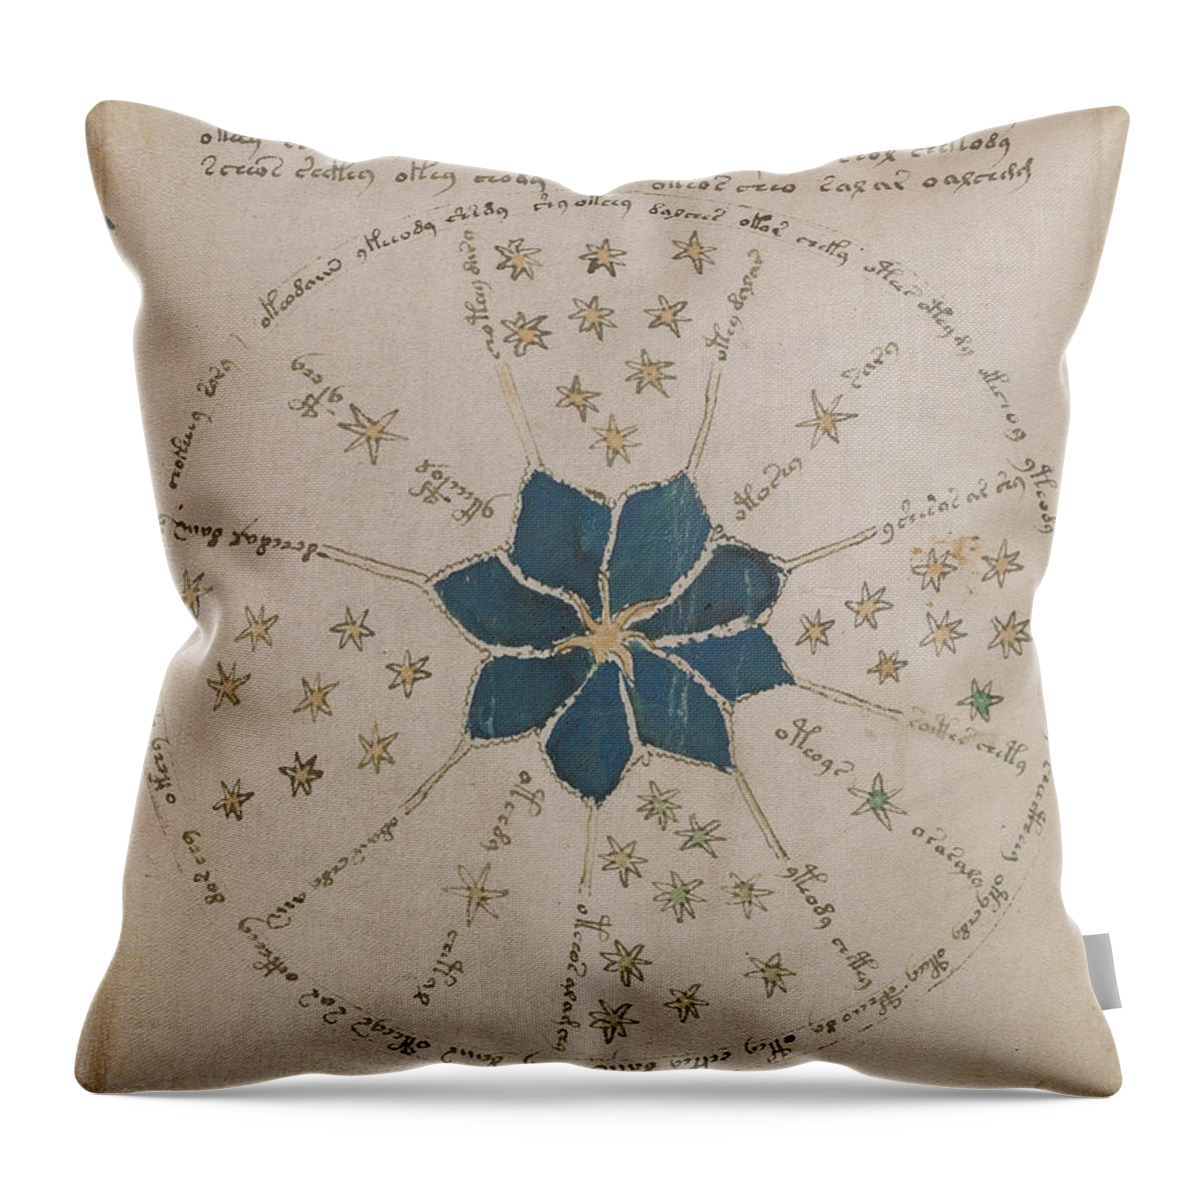 Astronomy Throw Pillow featuring the drawing Voynich Manuscript Astro Rosette 2 by Rick Bures